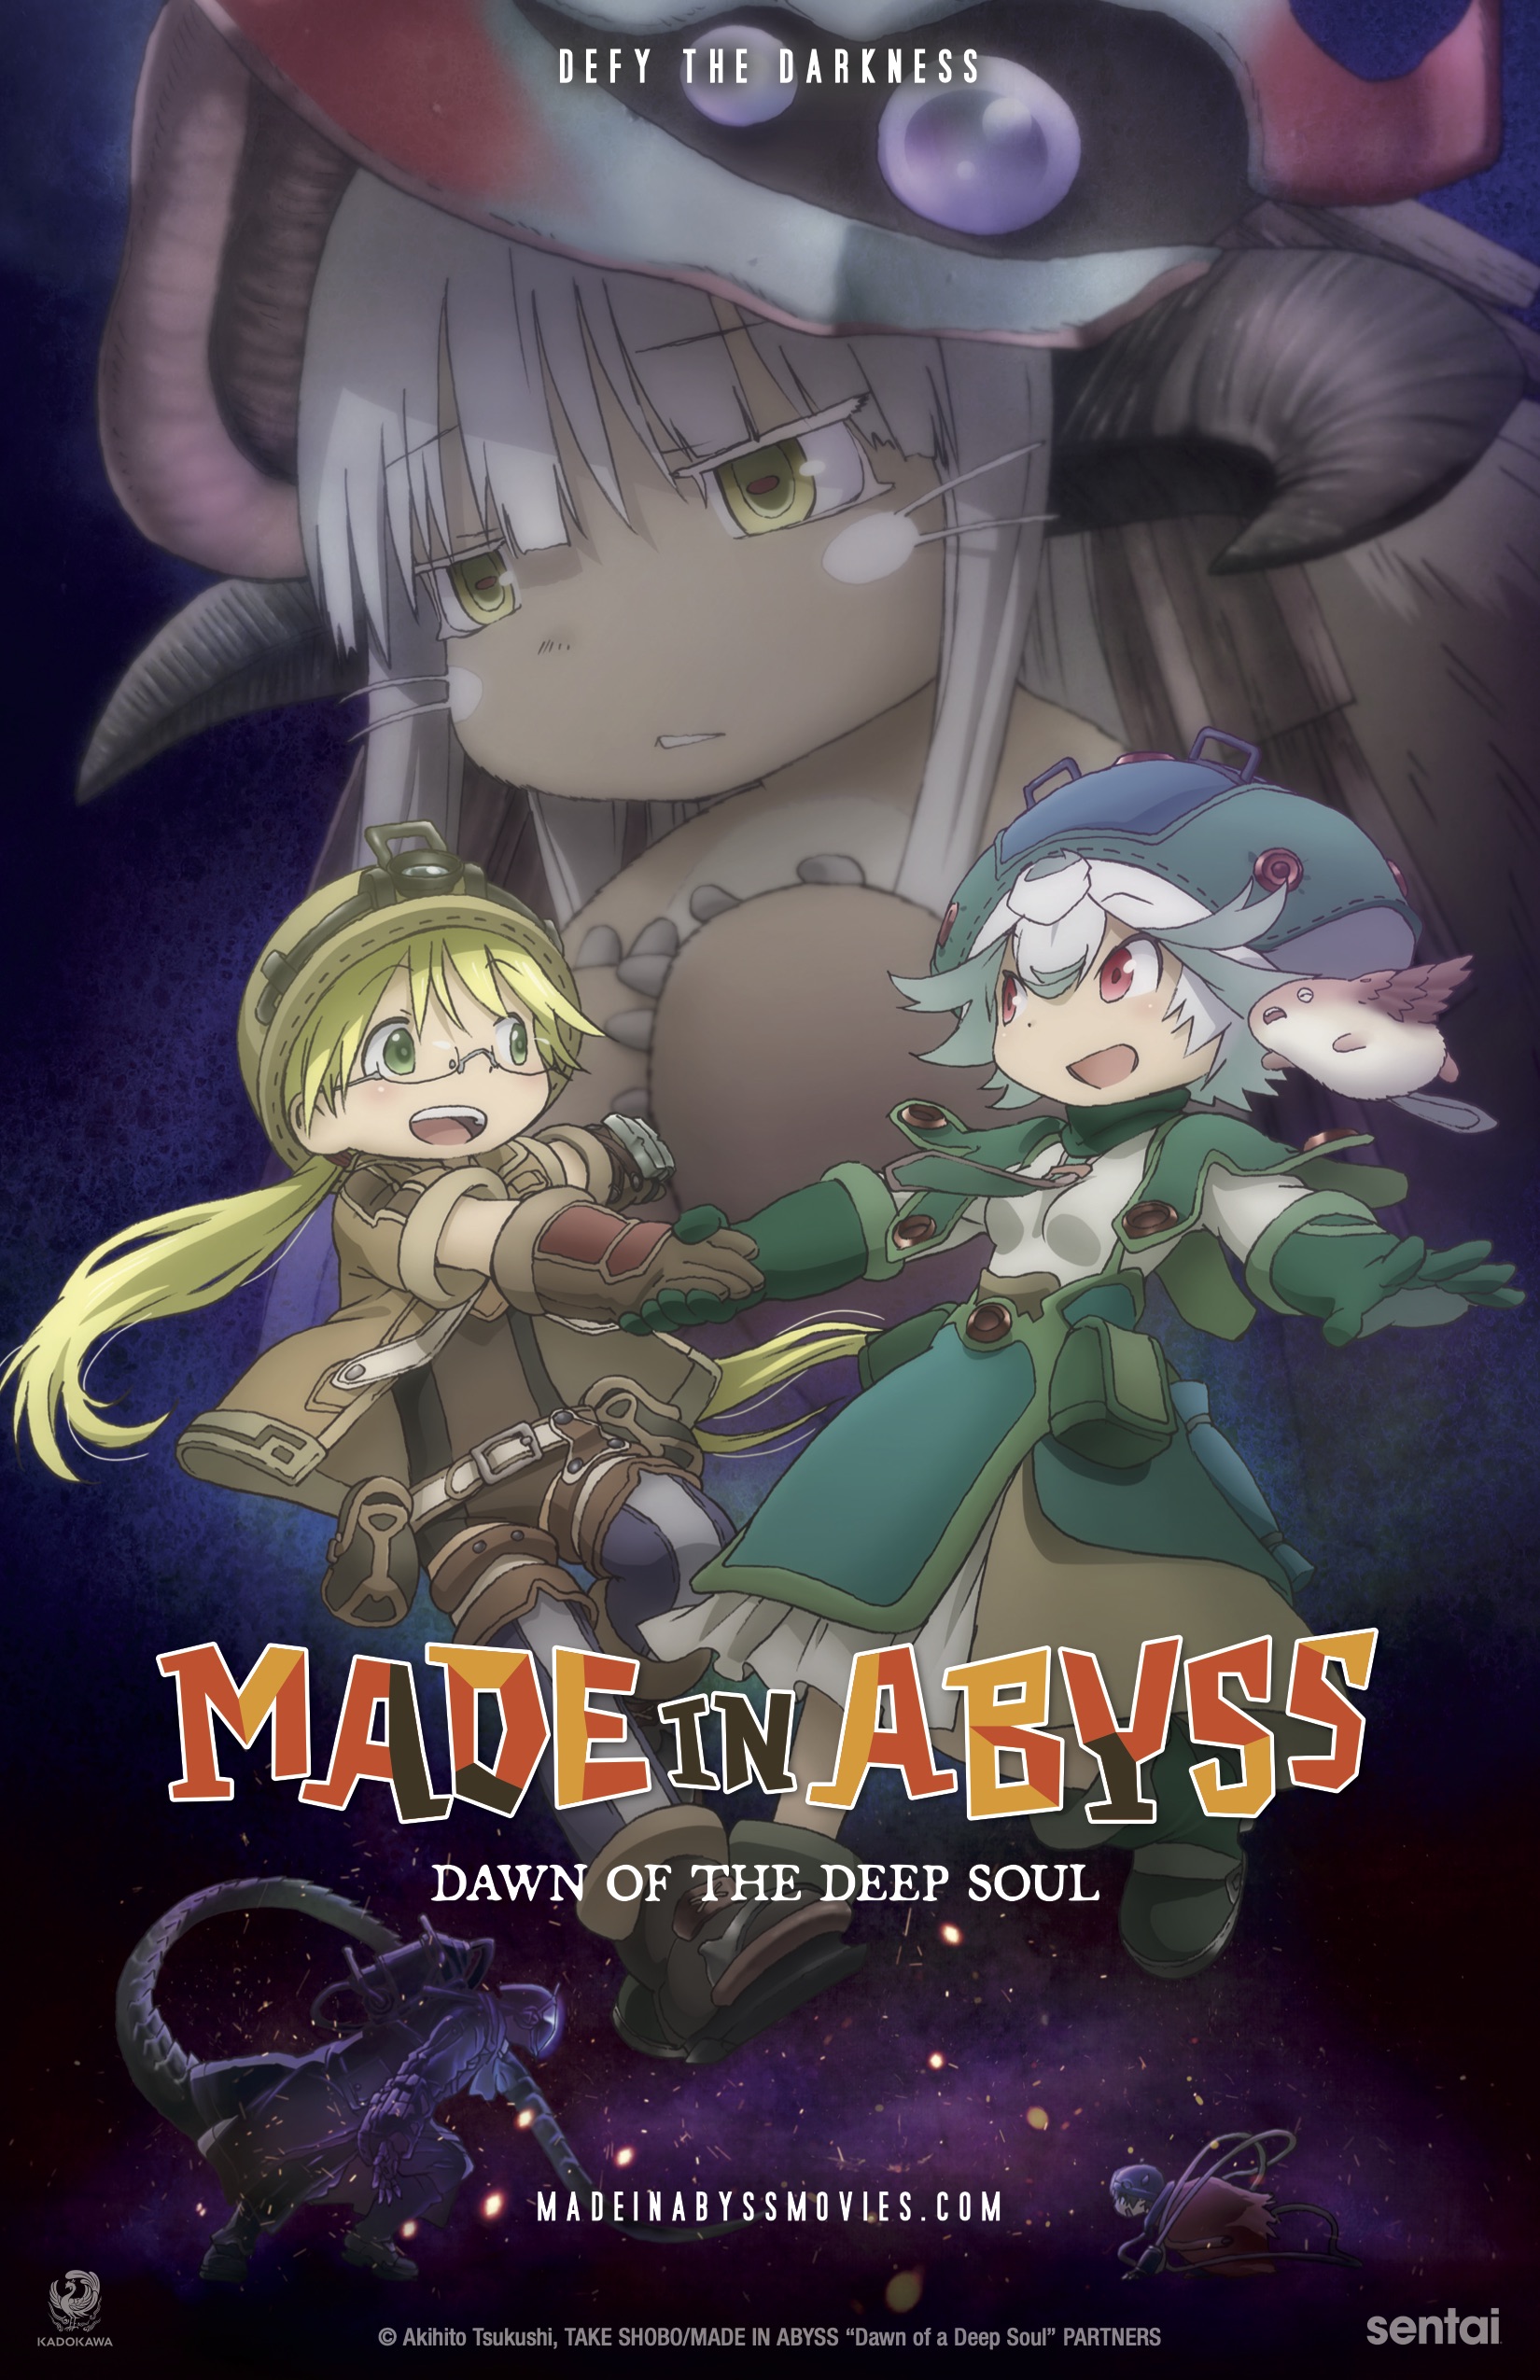 MADE IN ABYSS: Wandering Twilight Official Dub Trailer 